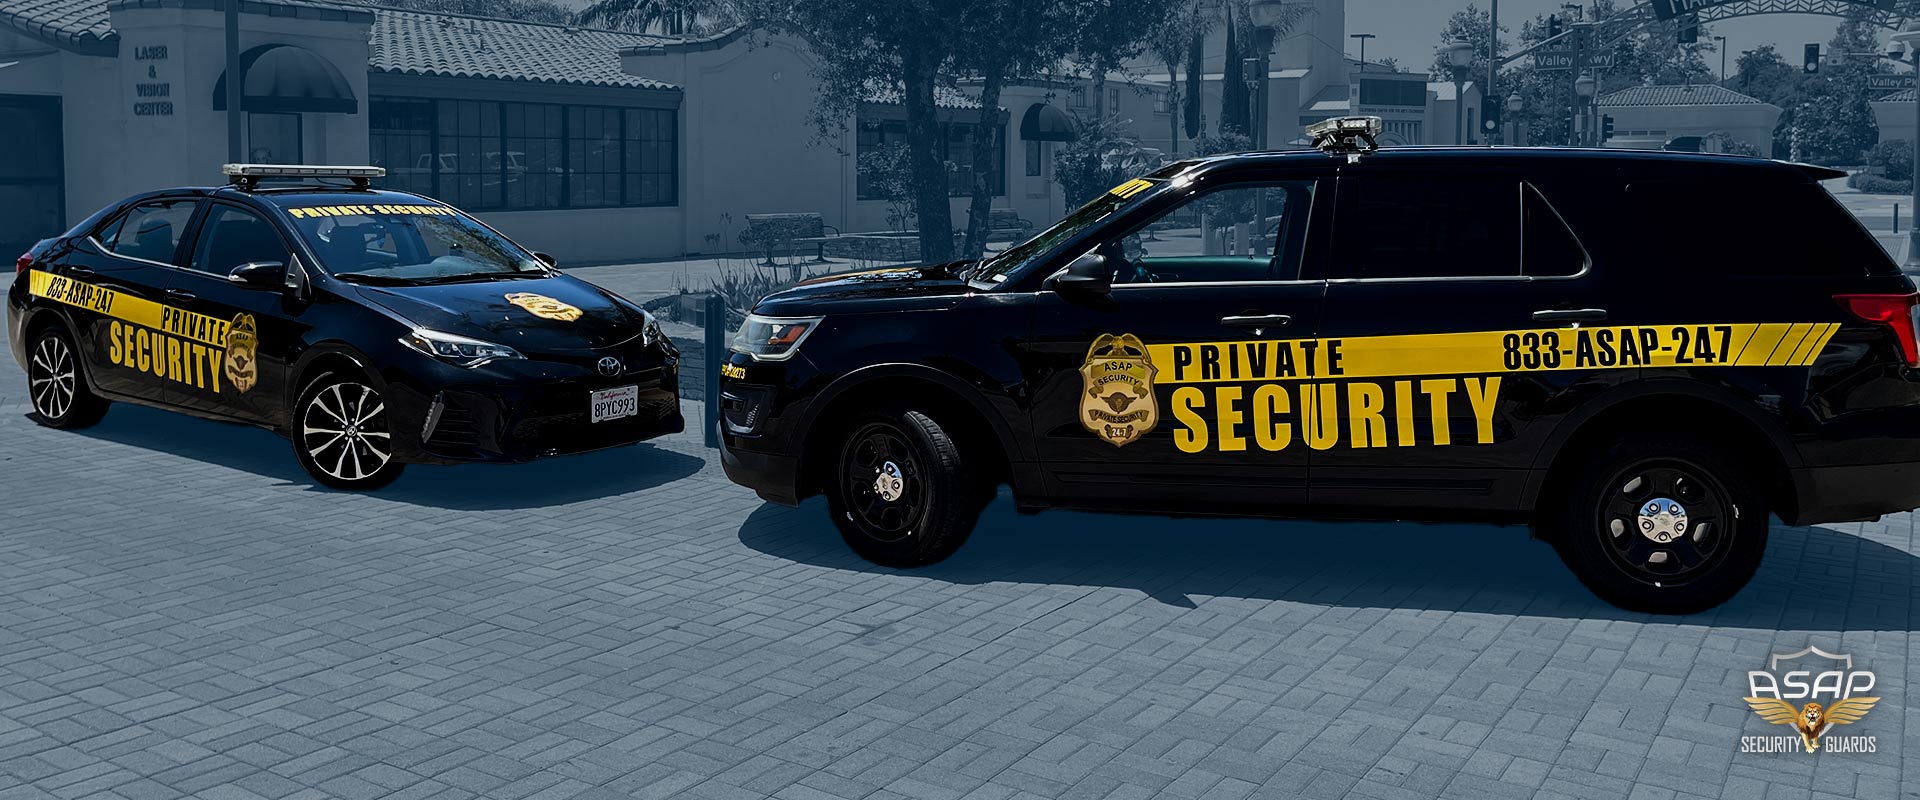 Understanding the Importance of Mobile Security Patrols